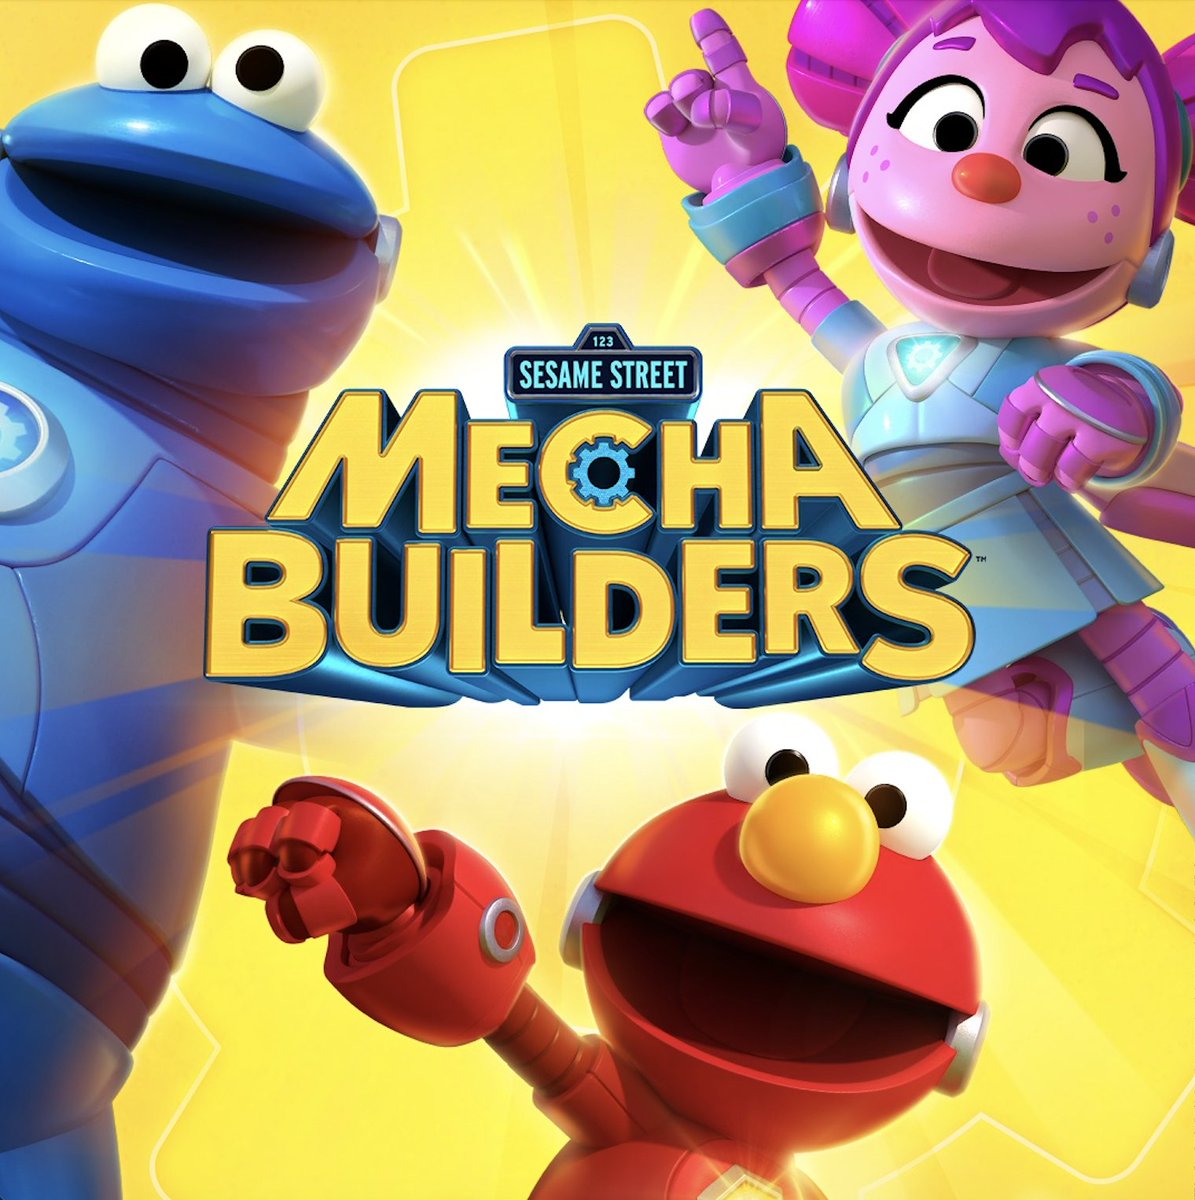 Are you ready to plan it, test it, and solve it with the #MechaBuilders? Watch the series now on PBS KIDS! @sesamestreet